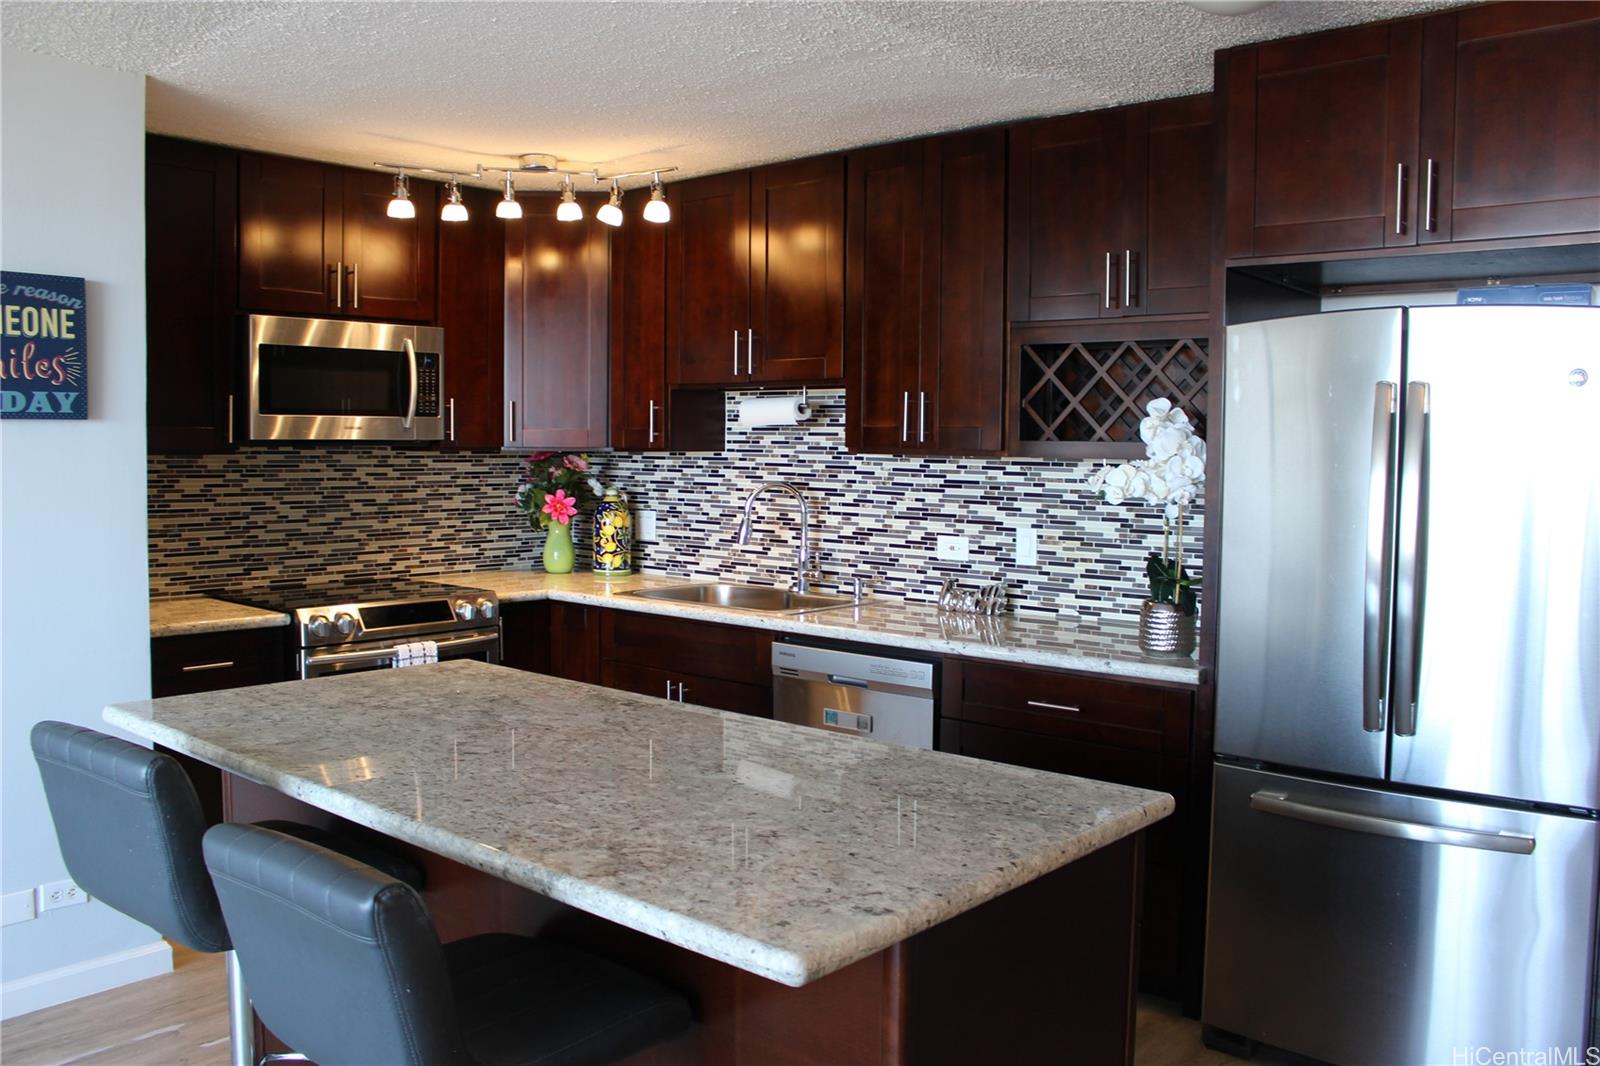 a kitchen with stainless steel appliances granite countertop a table chairs sink and refrigerator